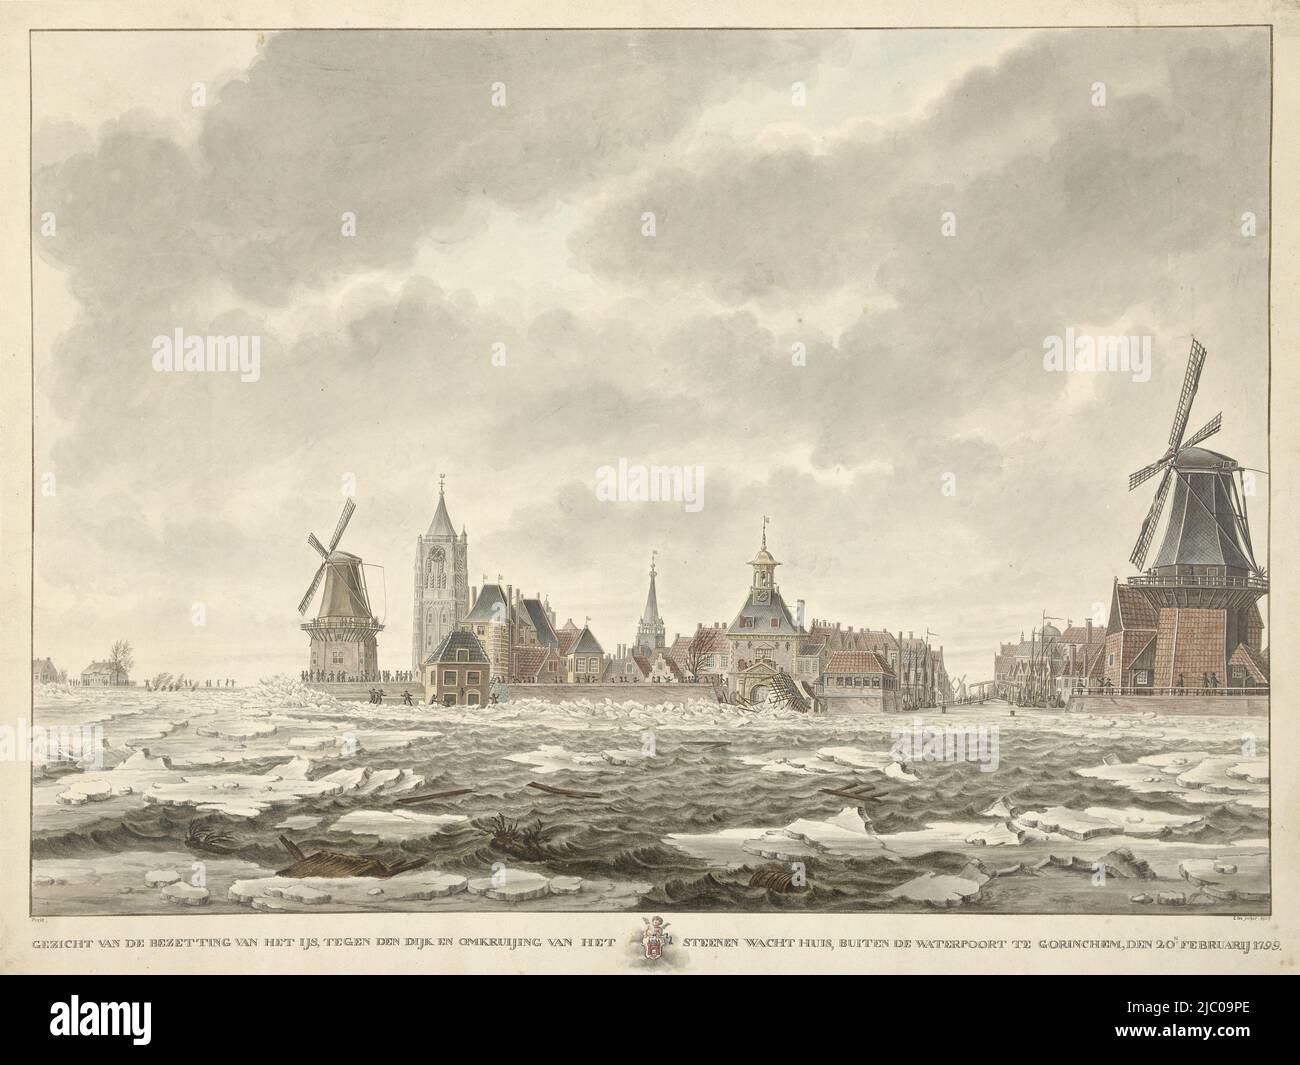 Face of the occupation of the ice, against the dike and crossing of the stone guardhouse, outside the Water Gate at Gorinchem, 20.n February 1799. Design for a print, View of the occupation of the ice outside the Water Gate in Gorinchem, Den 20.n February 1799., draughtsman: Cornelis de Jonker, 1807, paper, brush, pen, h 453 mm × w 600 mm Stock Photo